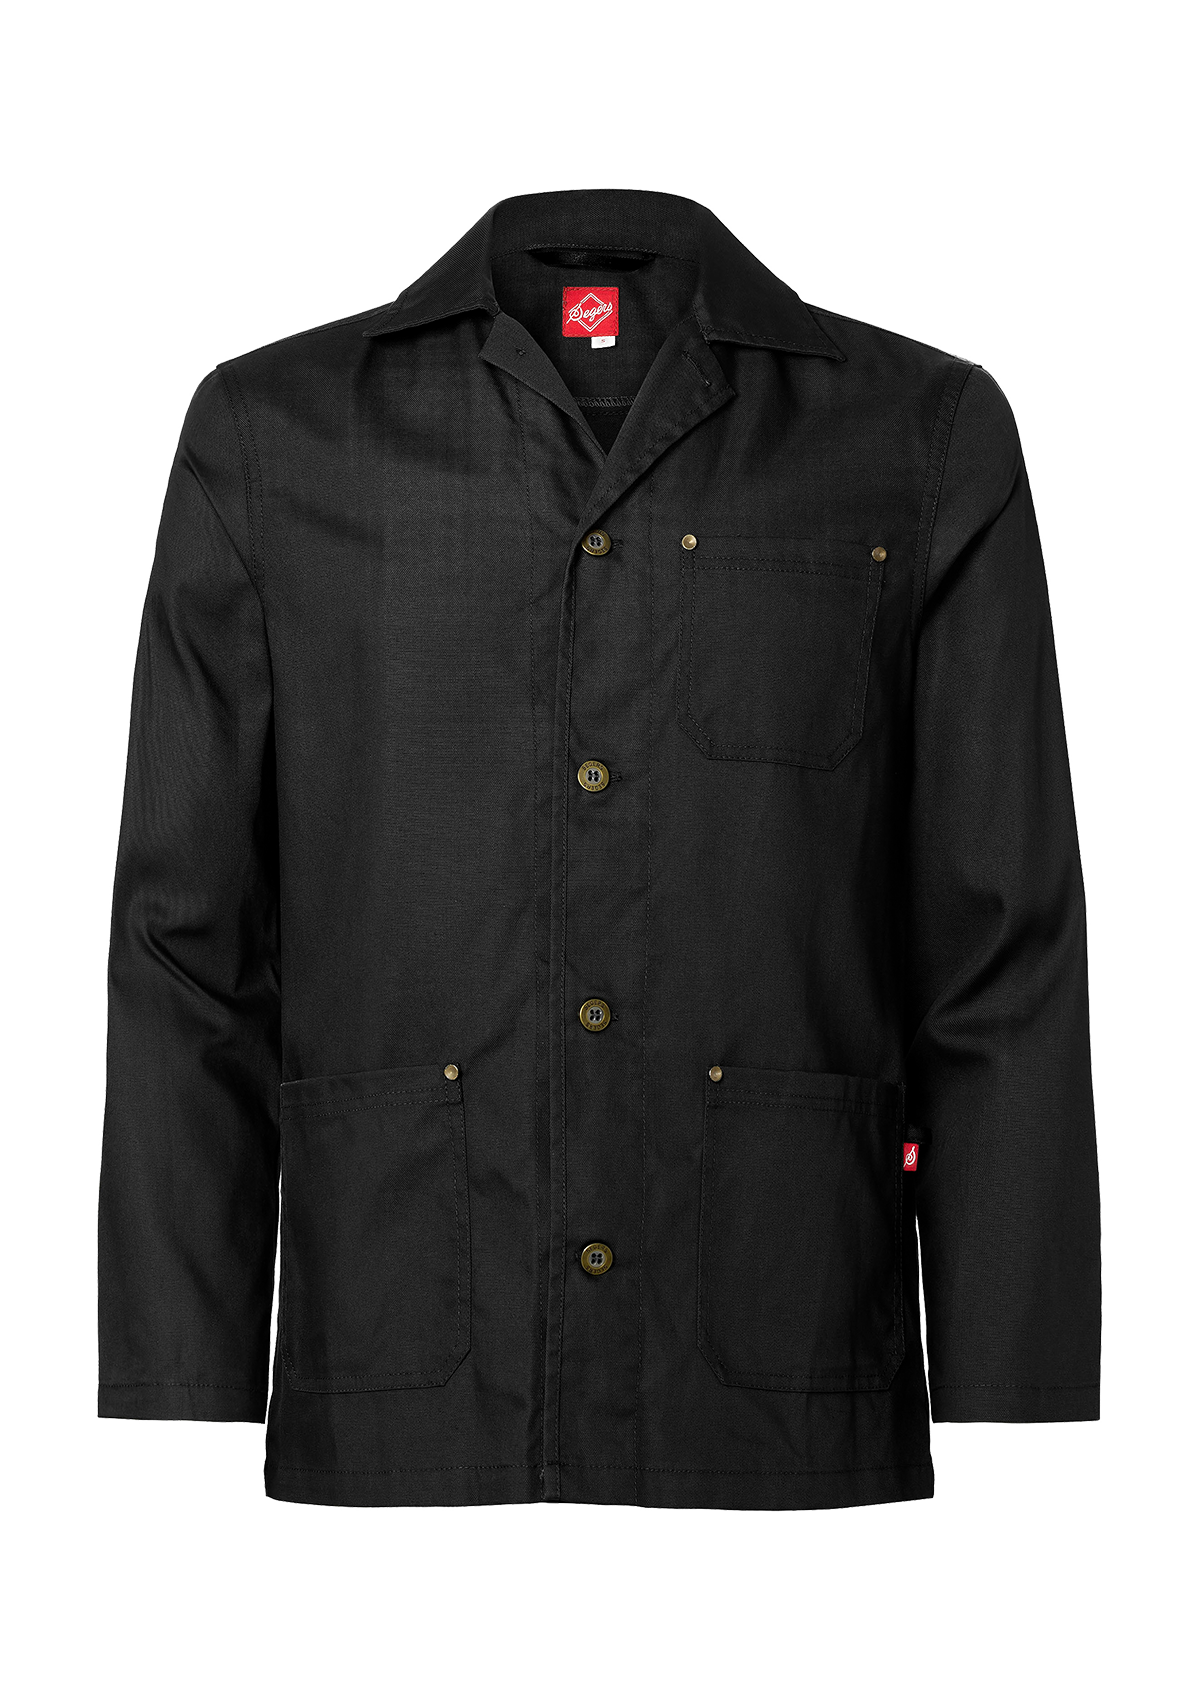 Unisex Chef's jacket with classic collar and long sleeves. Segers | Cookniche